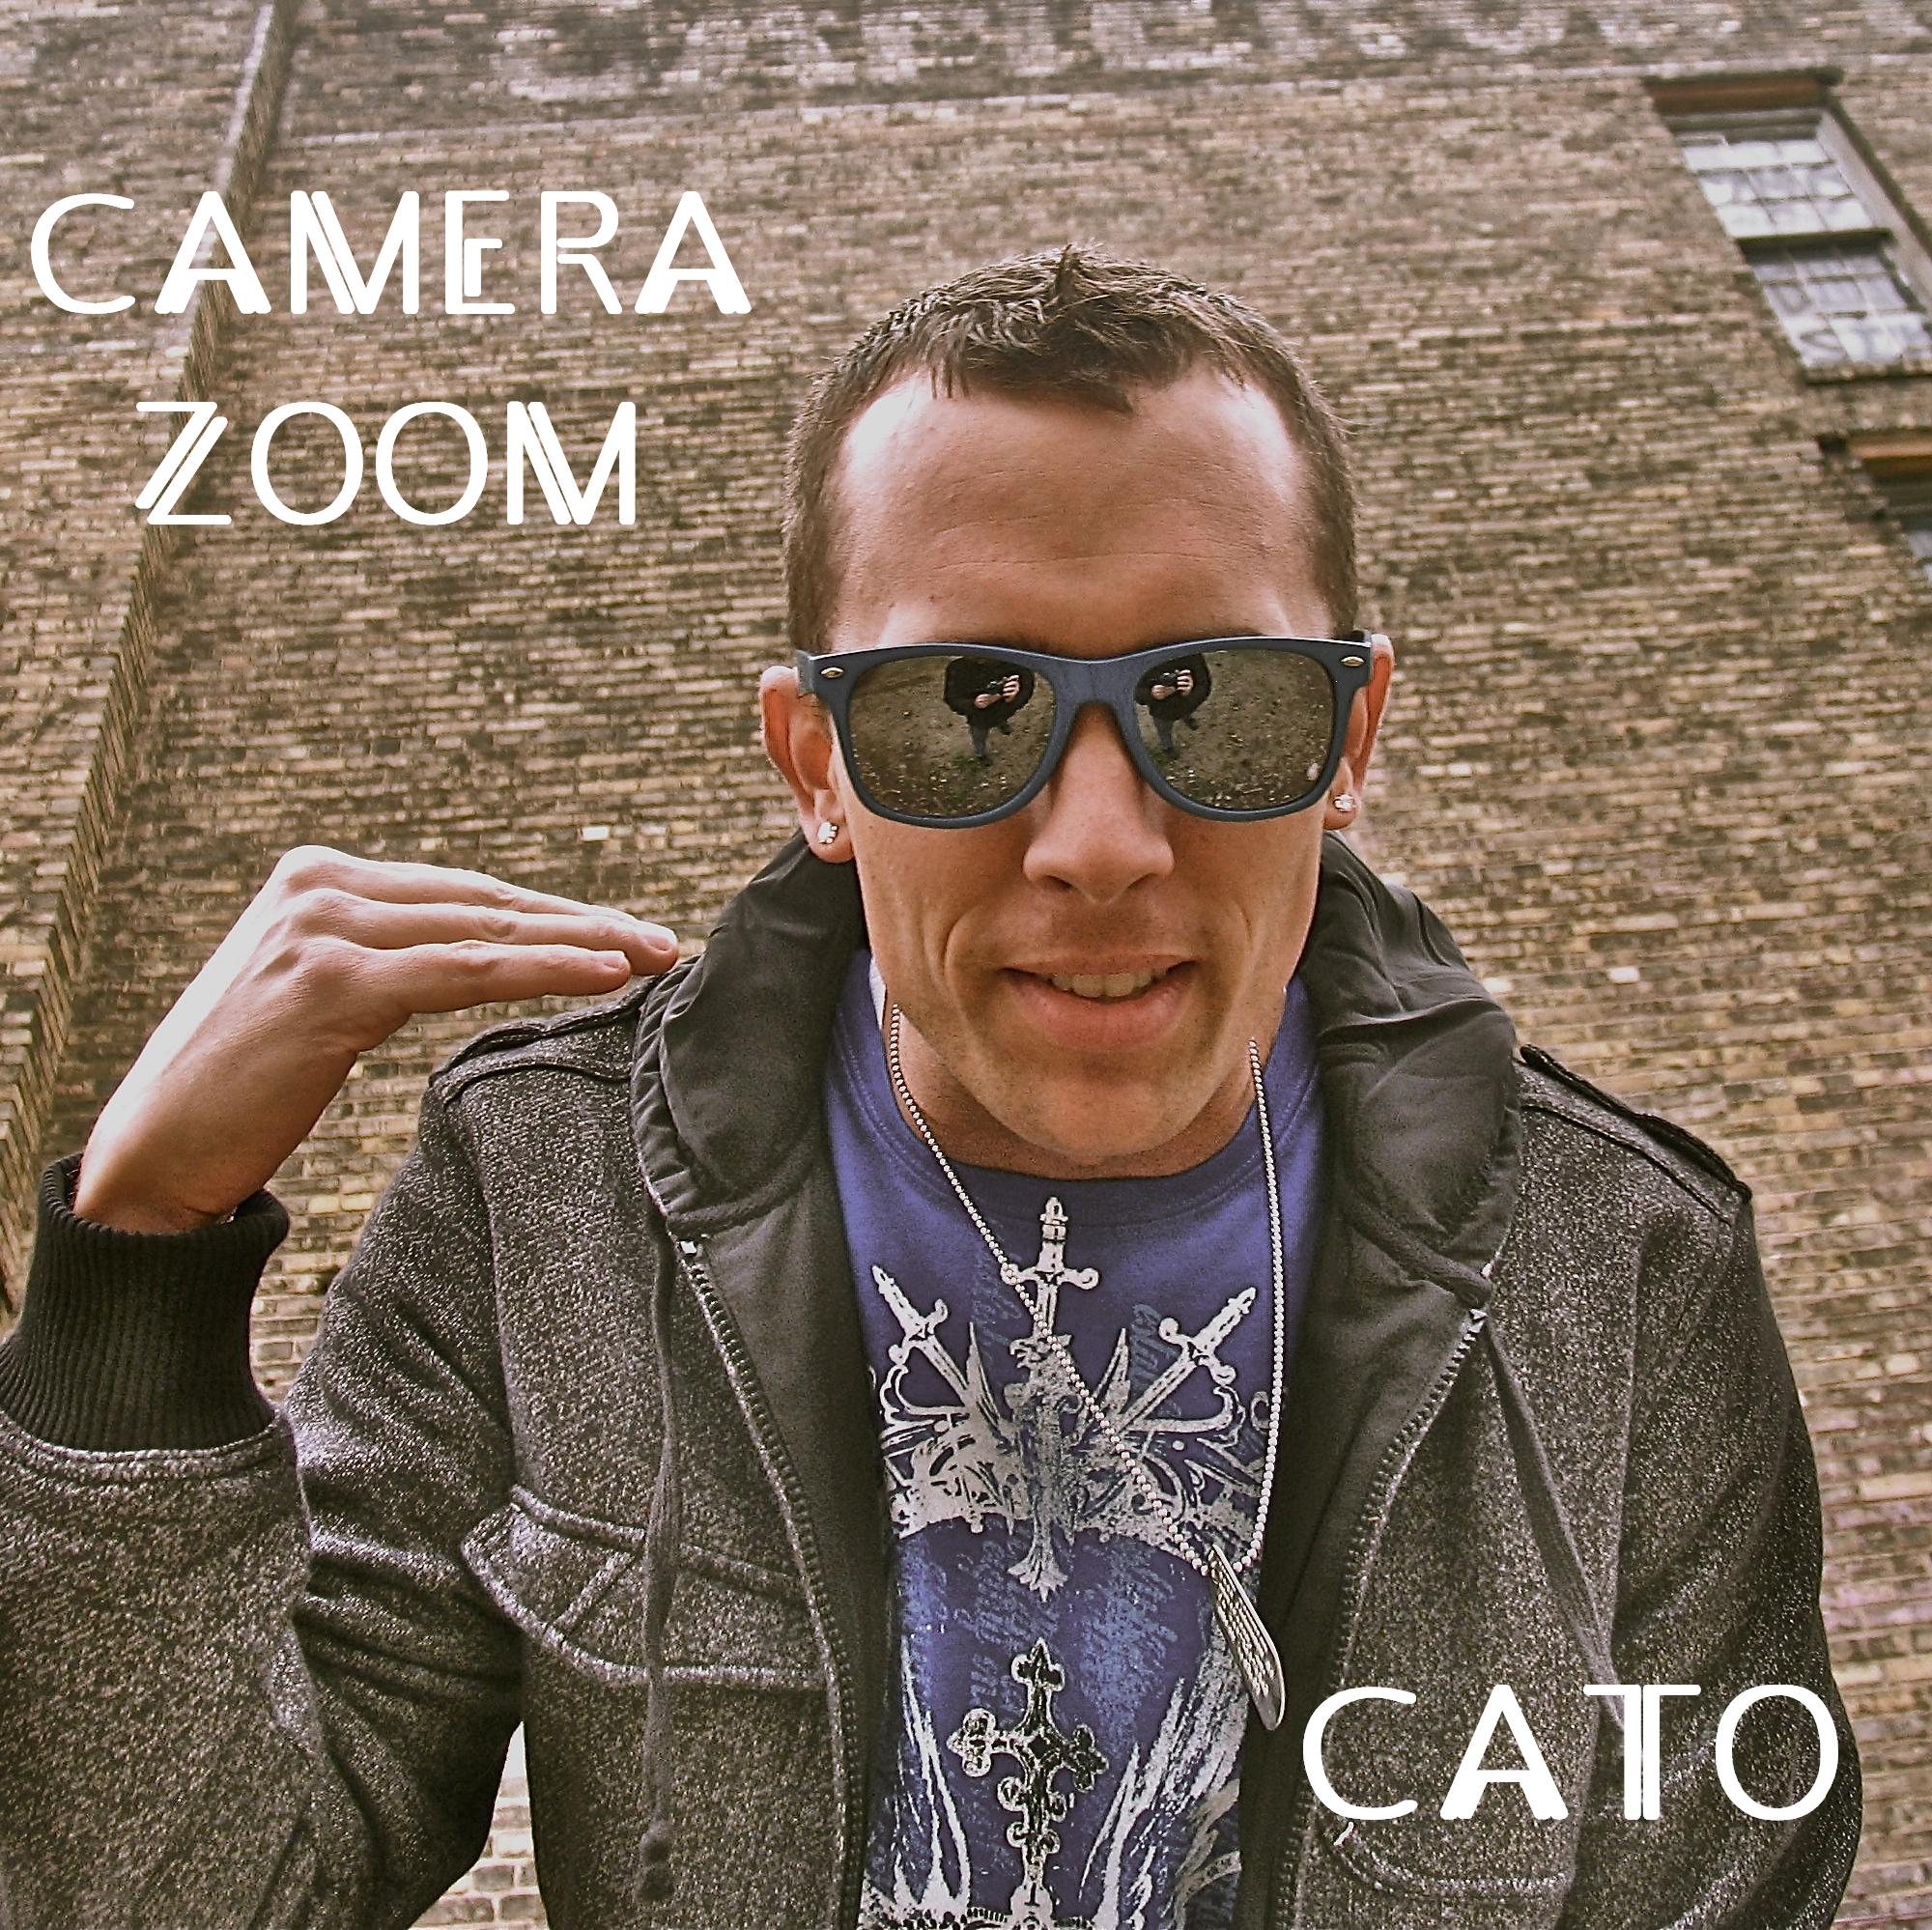 NEW ARTIST! Cato – Camera Zoom with official video